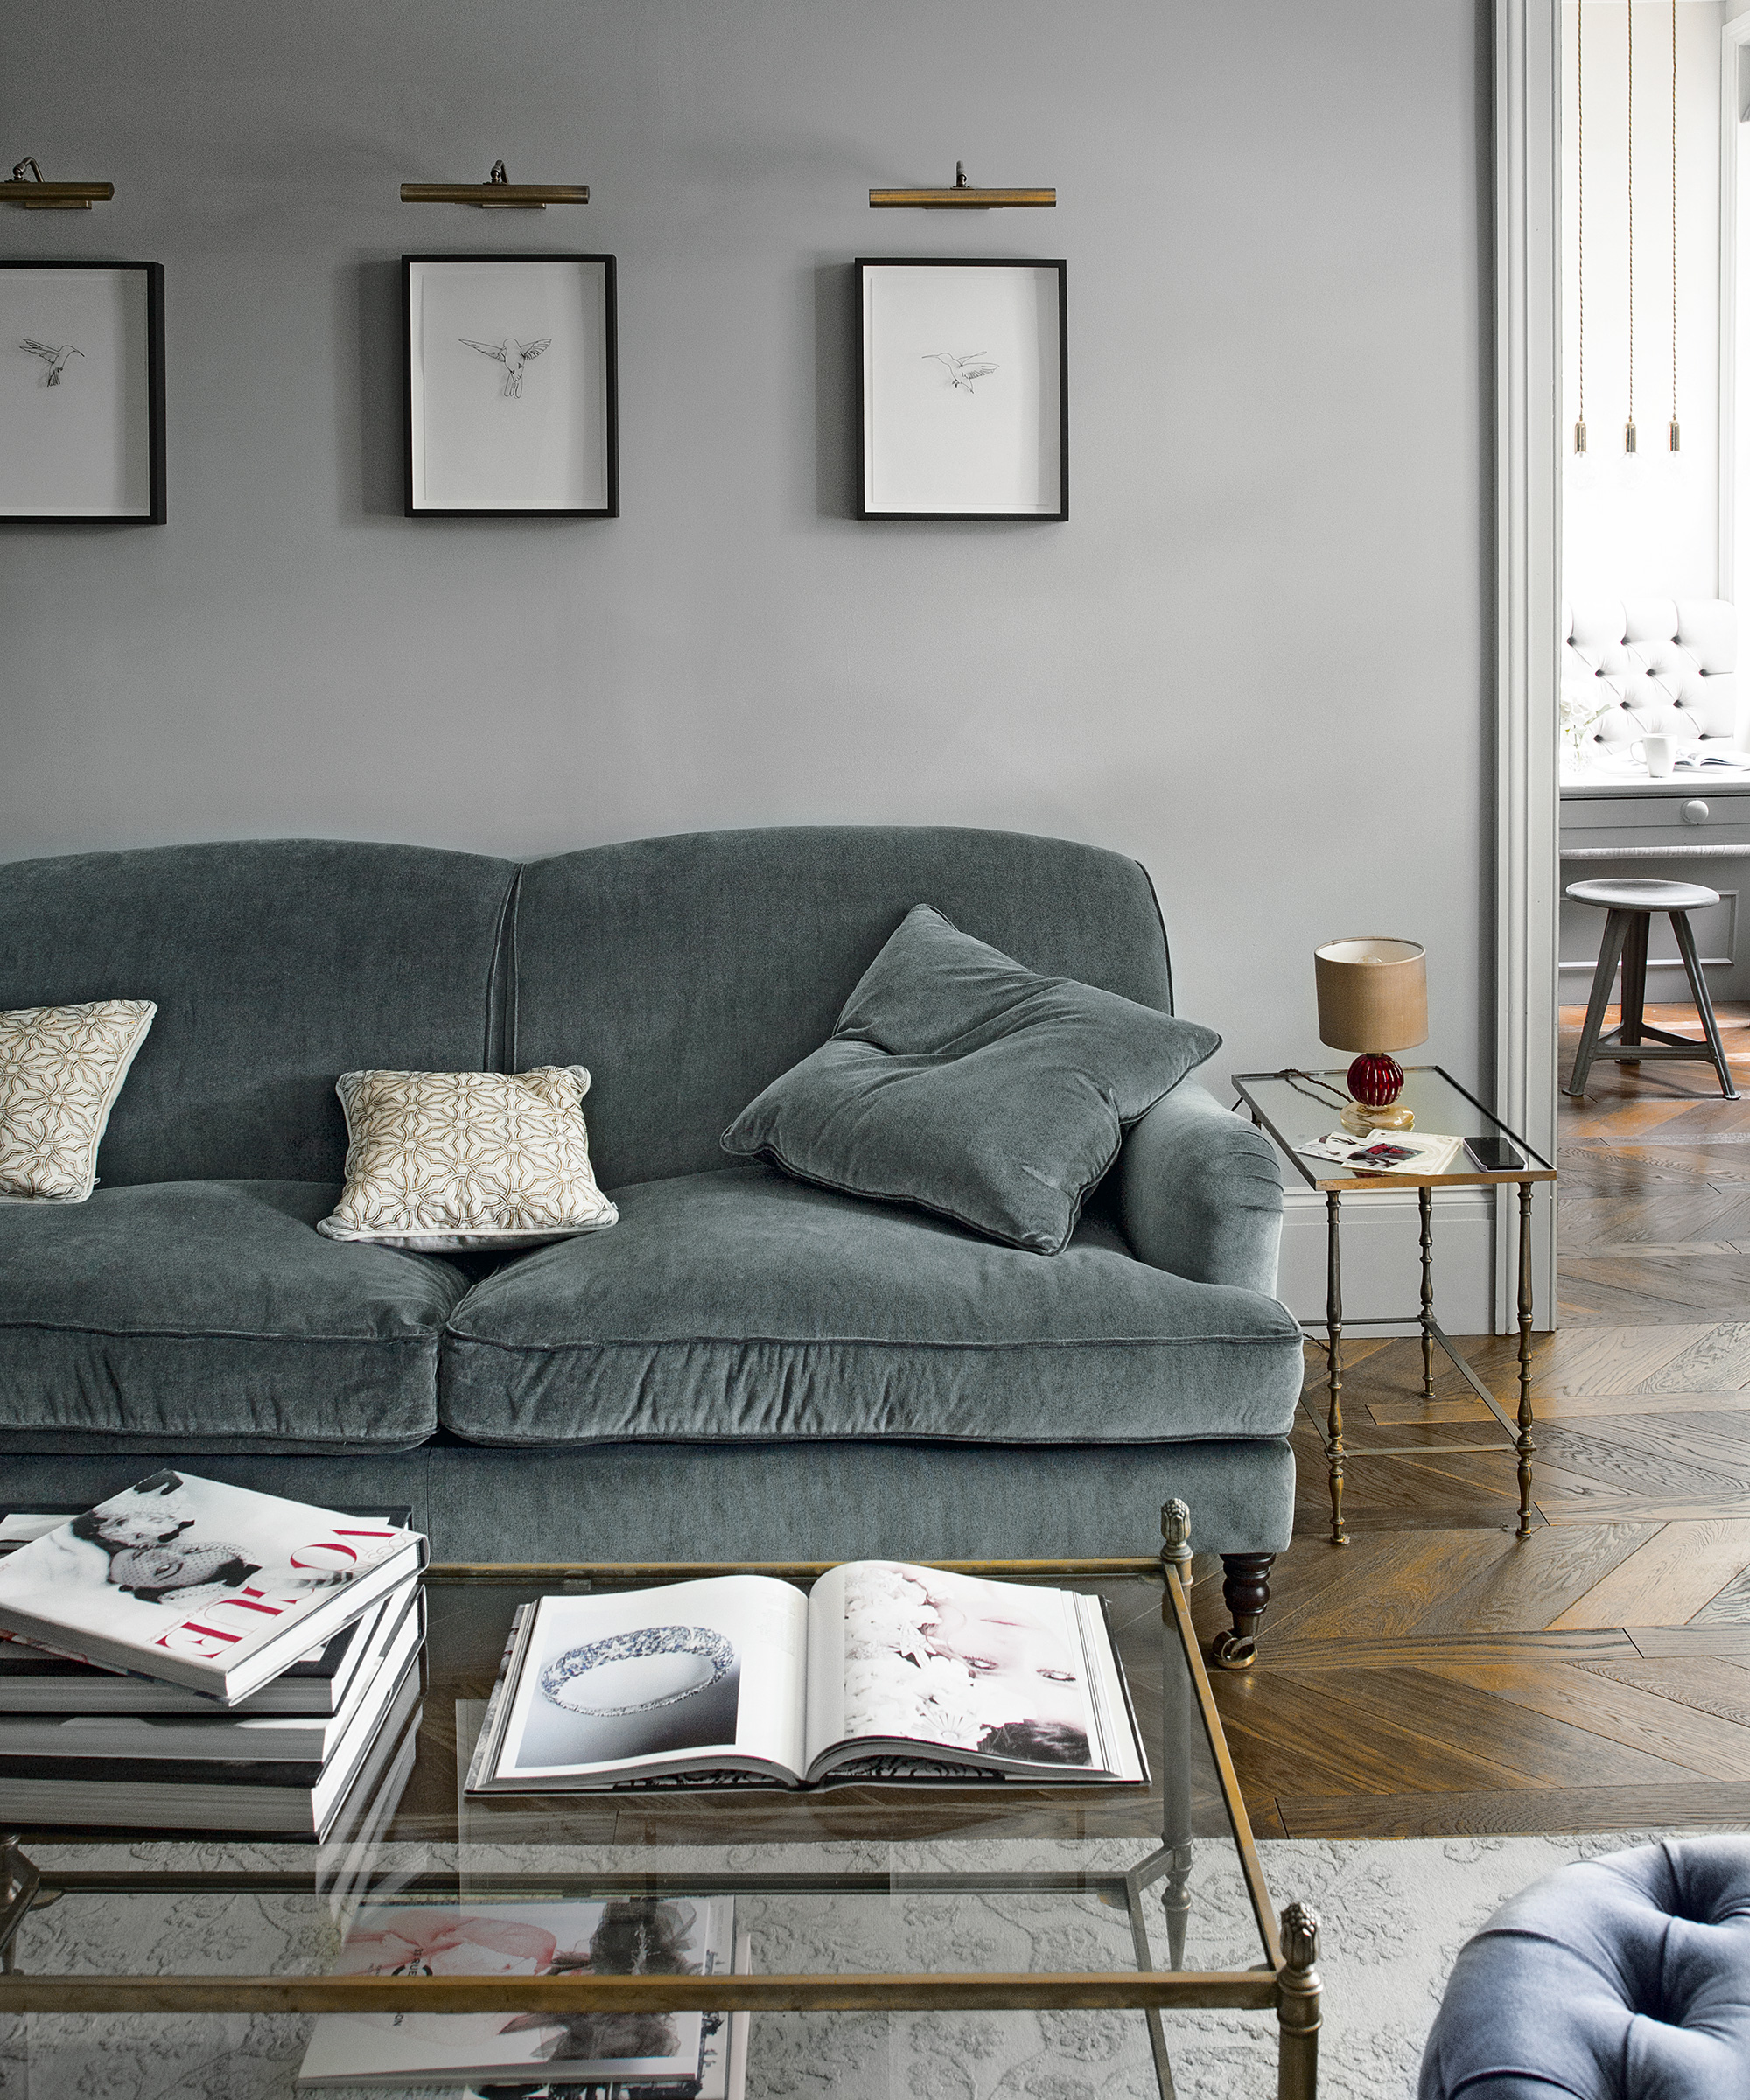 Grey living room ideas featuring a velvet grey sofa, pale grey walls and wooden flooring.